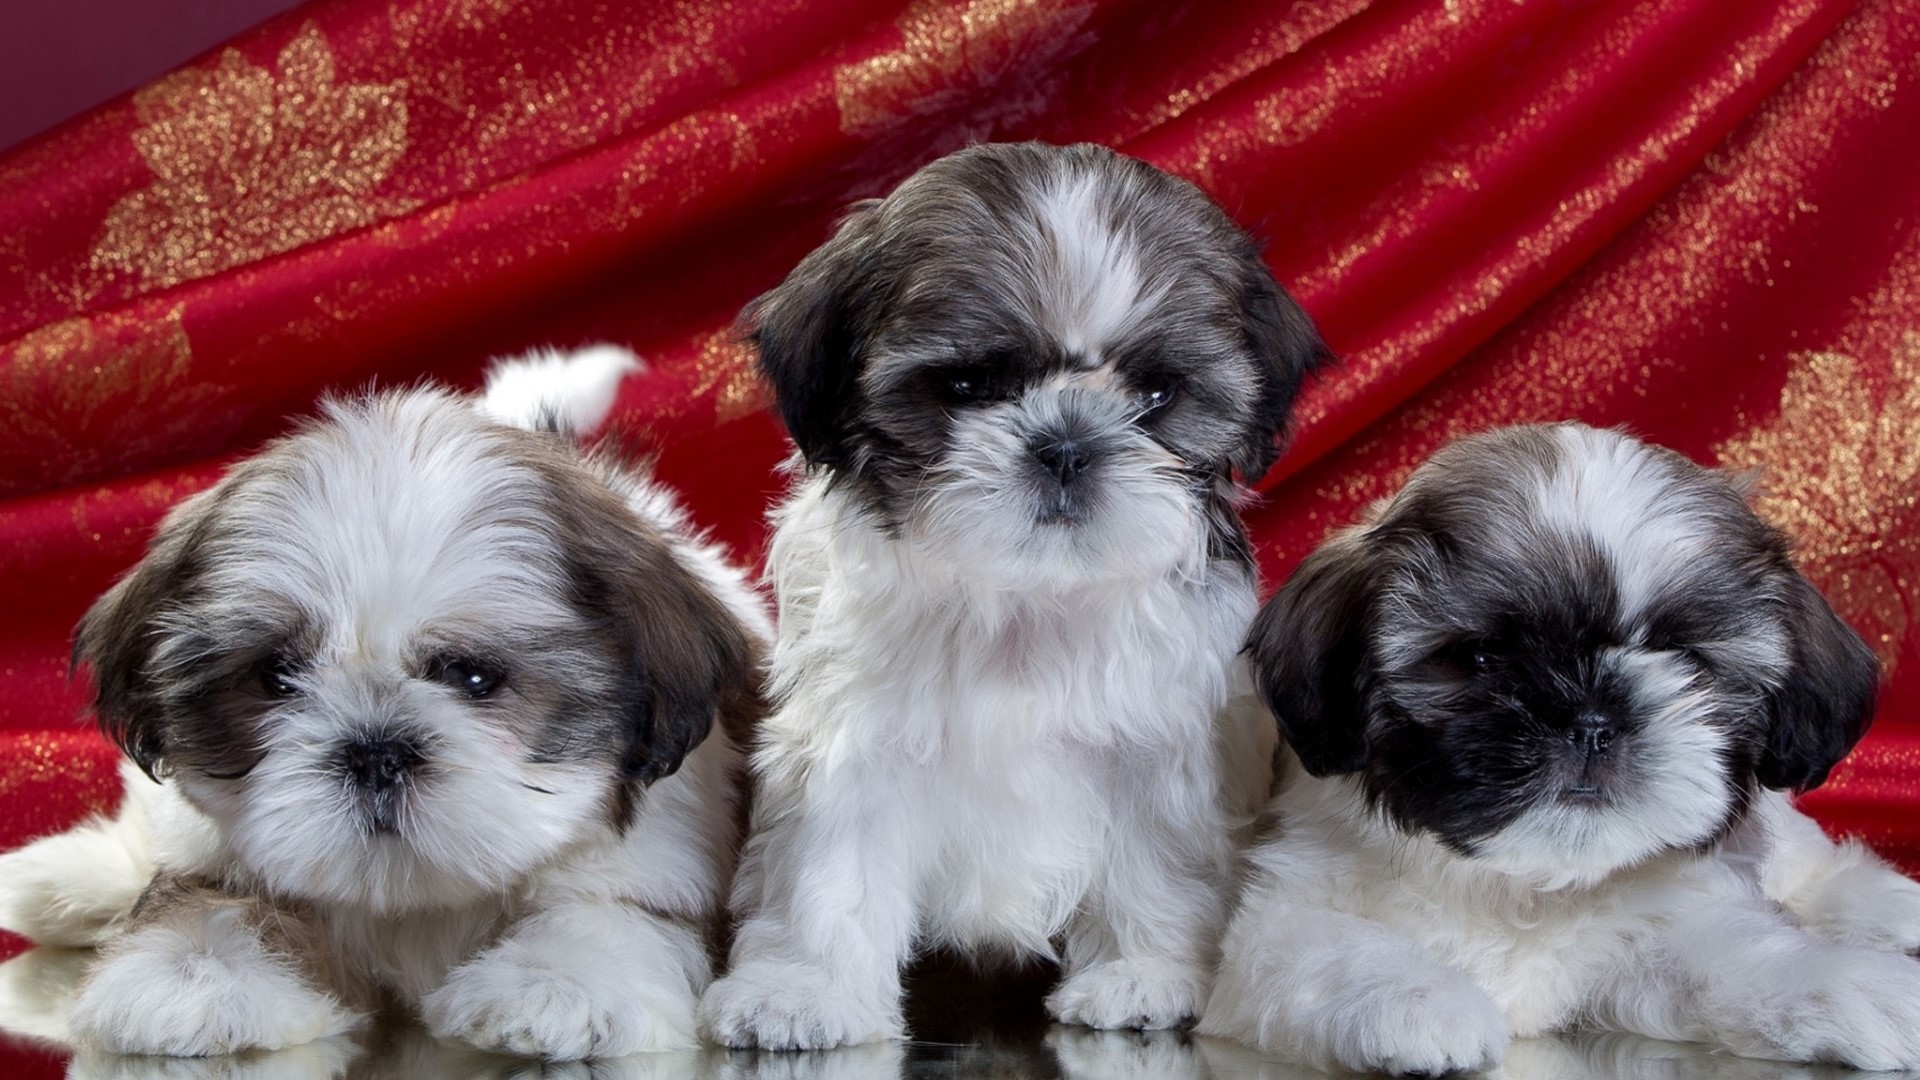 shih tzu, animal, baby animal, cute, dog, puppy, dogs cell phone wallpapers